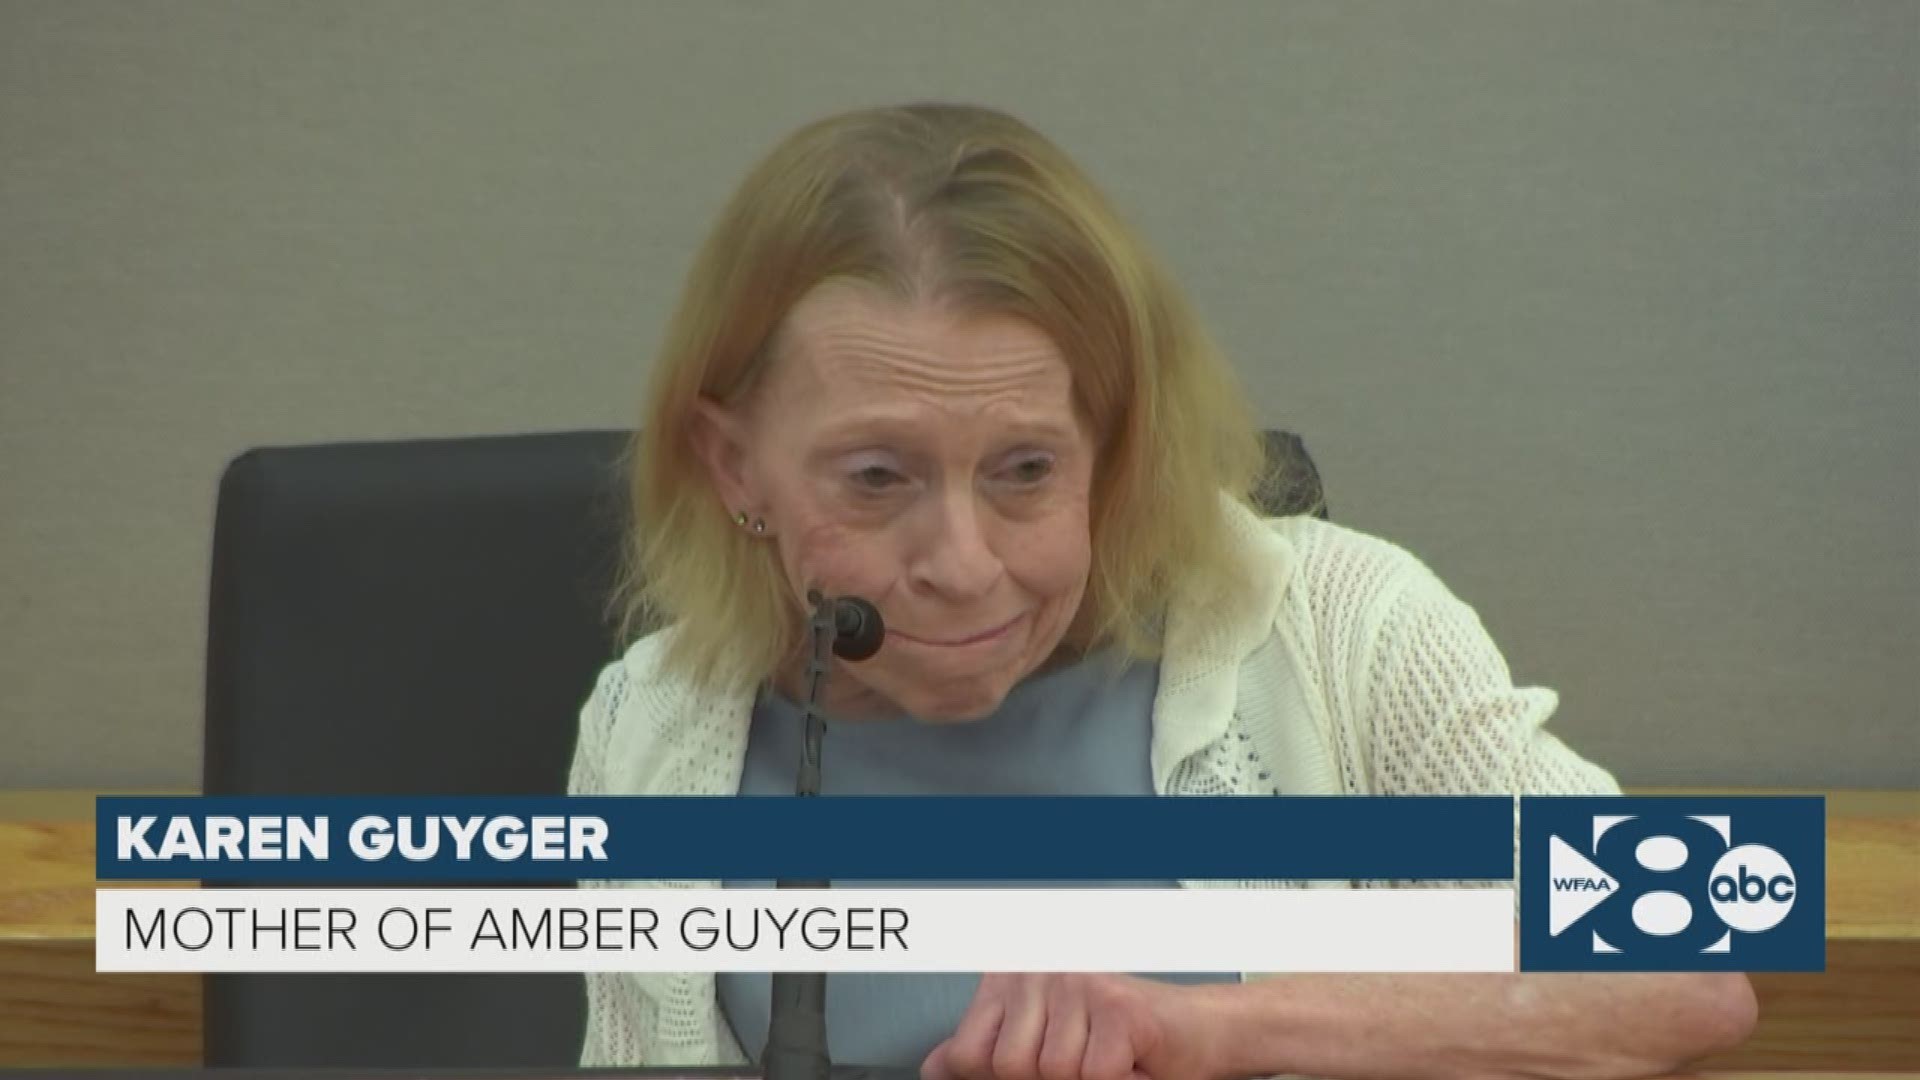 Karen Guyger, Amber Guyger's mother, took the stand Wednesday to testify during the punishment phase of the trial.